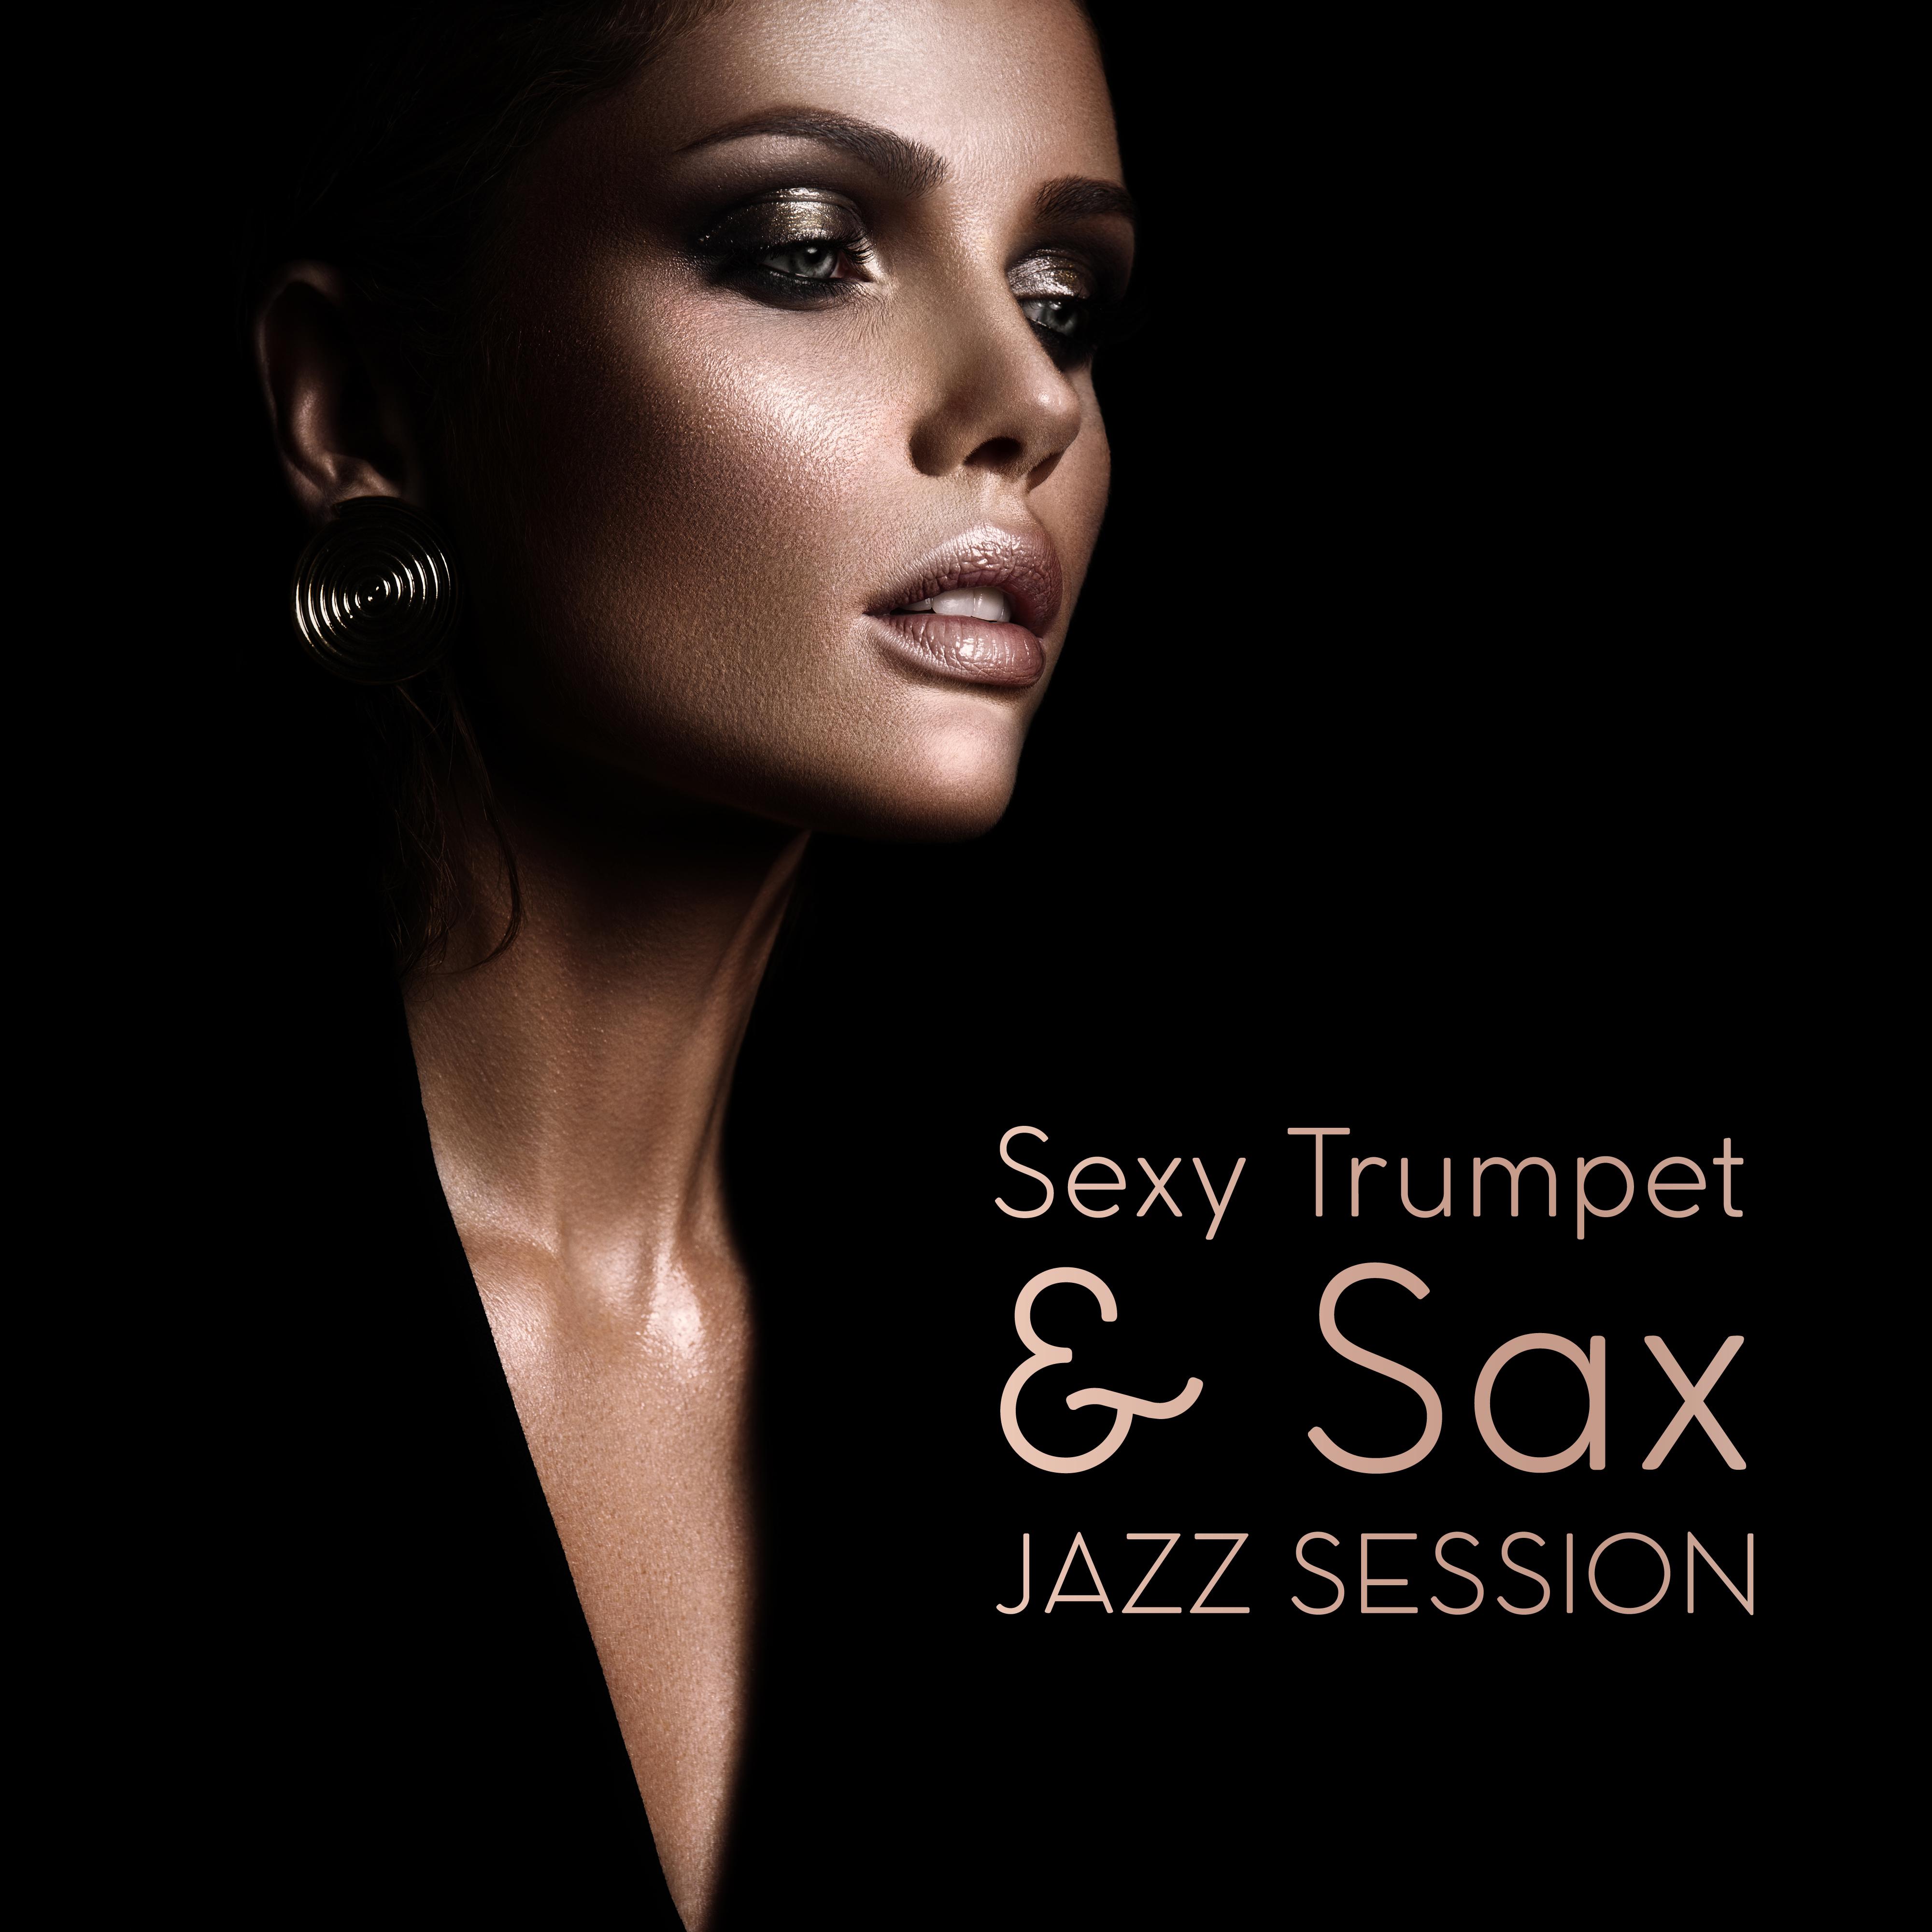 **** Trumpet & Sax Jazz Session: 2019 Smootth Jazz Music Compilation, Vintage Sounds of Wind Instruments, Piano Melodies, Joyful Rhythms for Nice Time Spending in Restaurant, Cafe or at Home